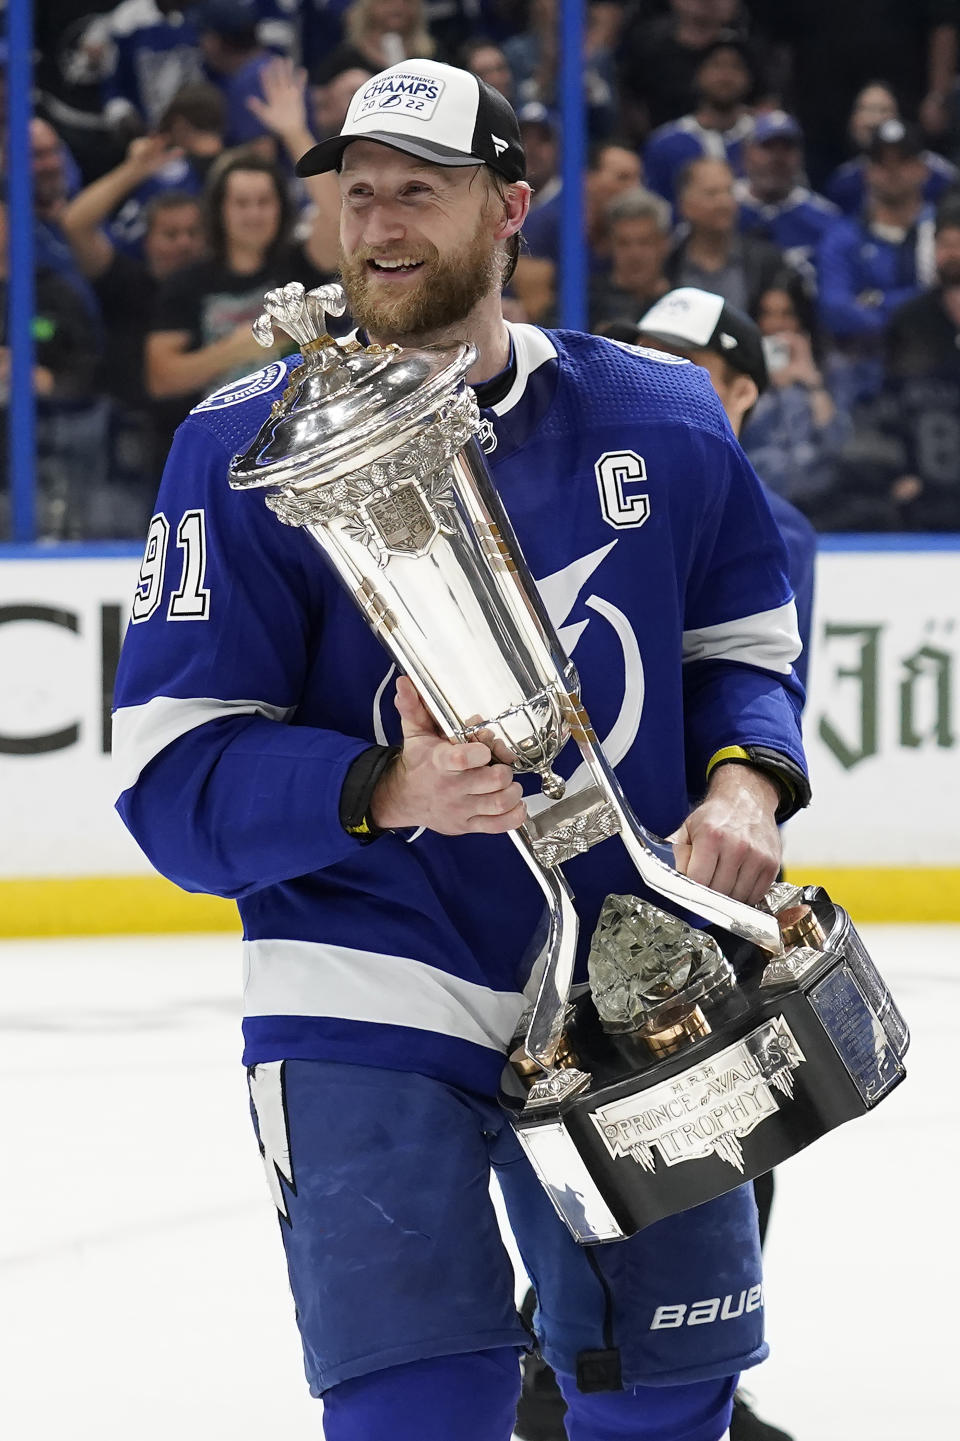 Tampa Bay Lightning center Steven Stamkos holds the Prince of Wales Trophy after defeating the New York Rangers during Game 6 of the NHL hockey Stanley Cup playoffs Eastern Conference finals Saturday, June 11, 2022, in Tampa, Fla. The Lightning advanced to the Stanley Cup Finals. (AP Photo/Chris O'Meara)